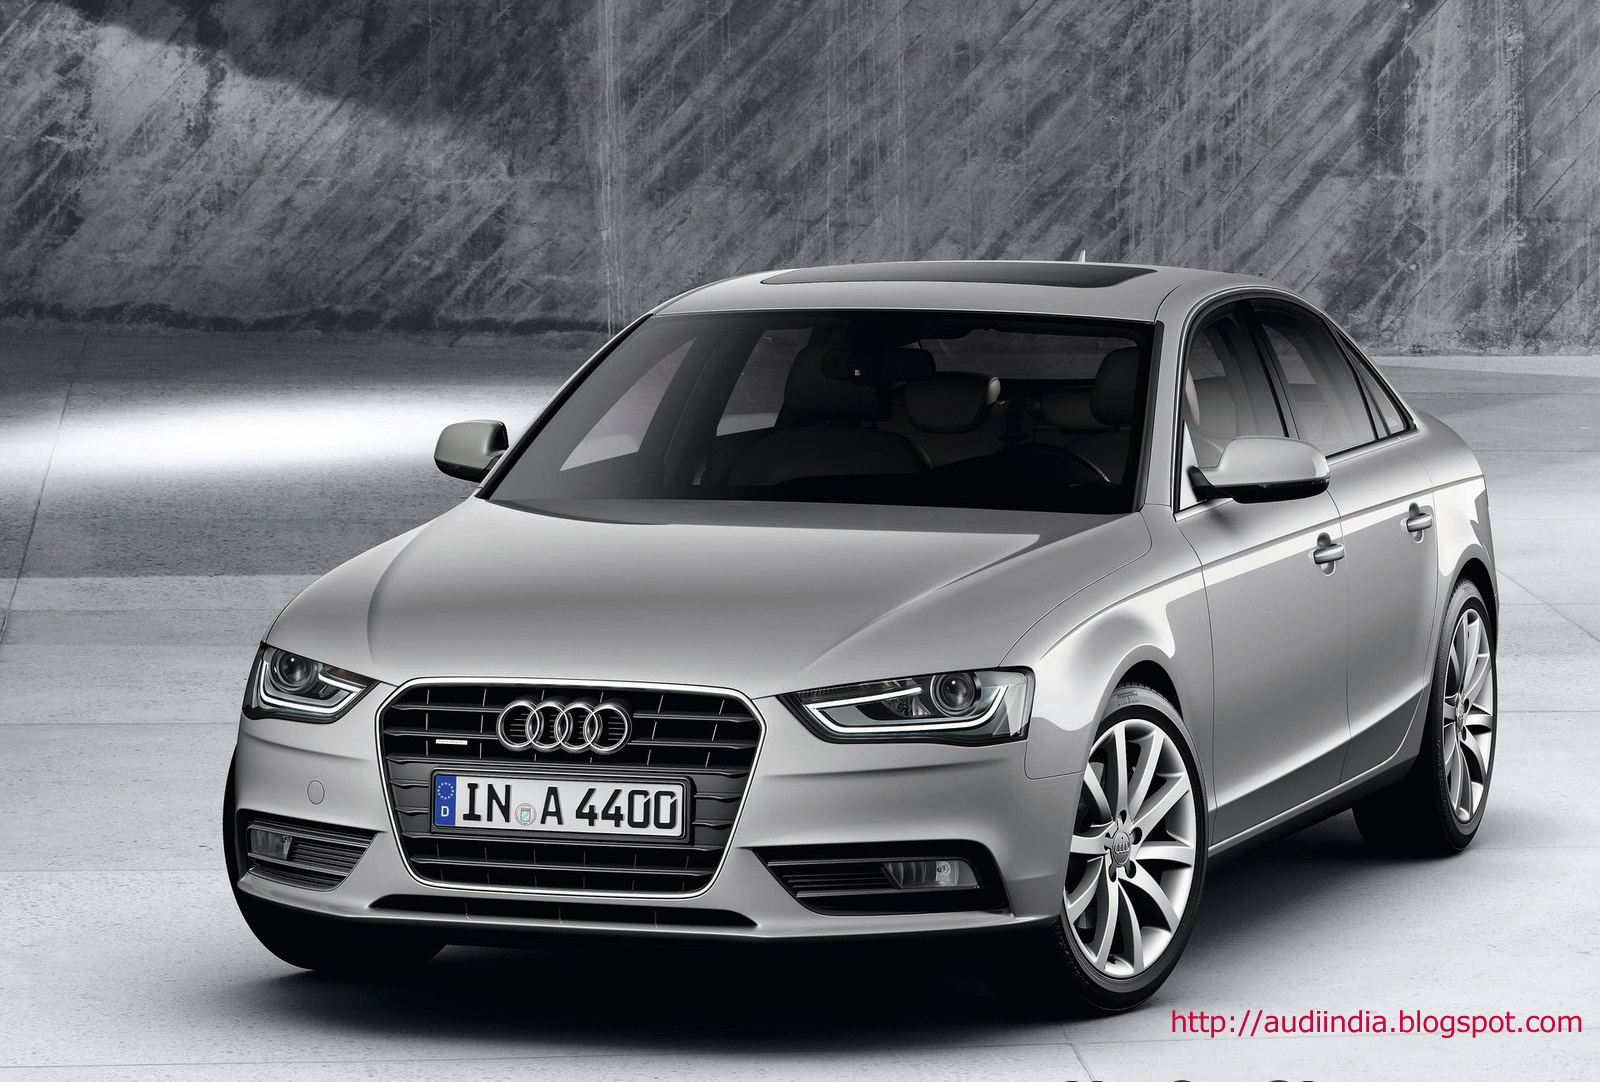 The World of Audi - Audi Forum | News | Prices | Technical